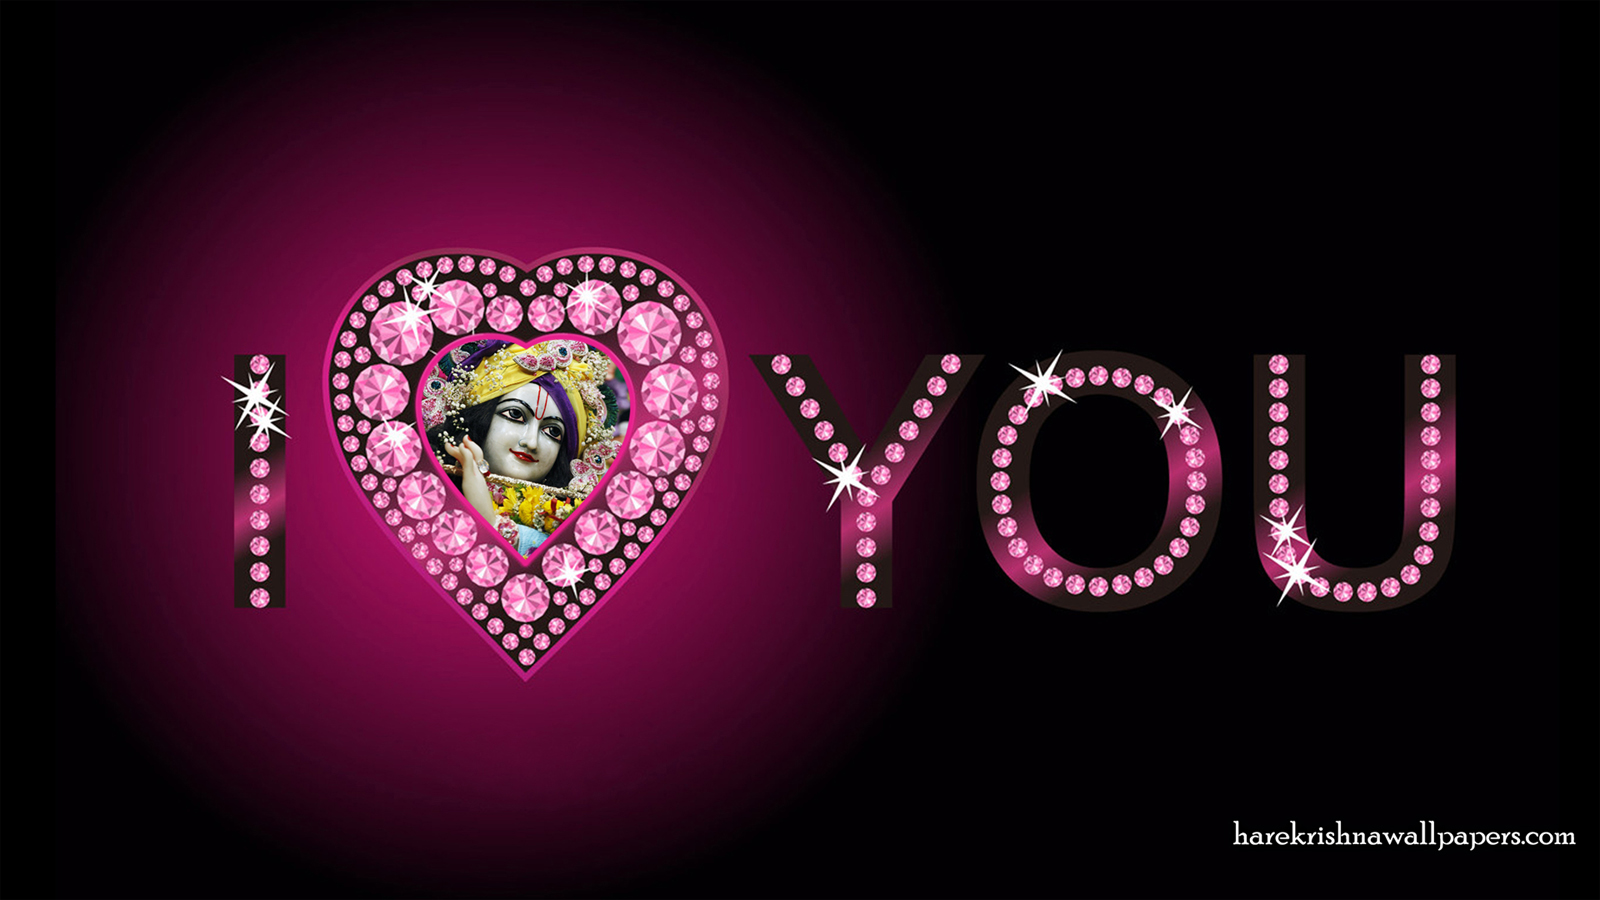 I Love You Gopinath Wallpaper (002) Size 1600x900 Download